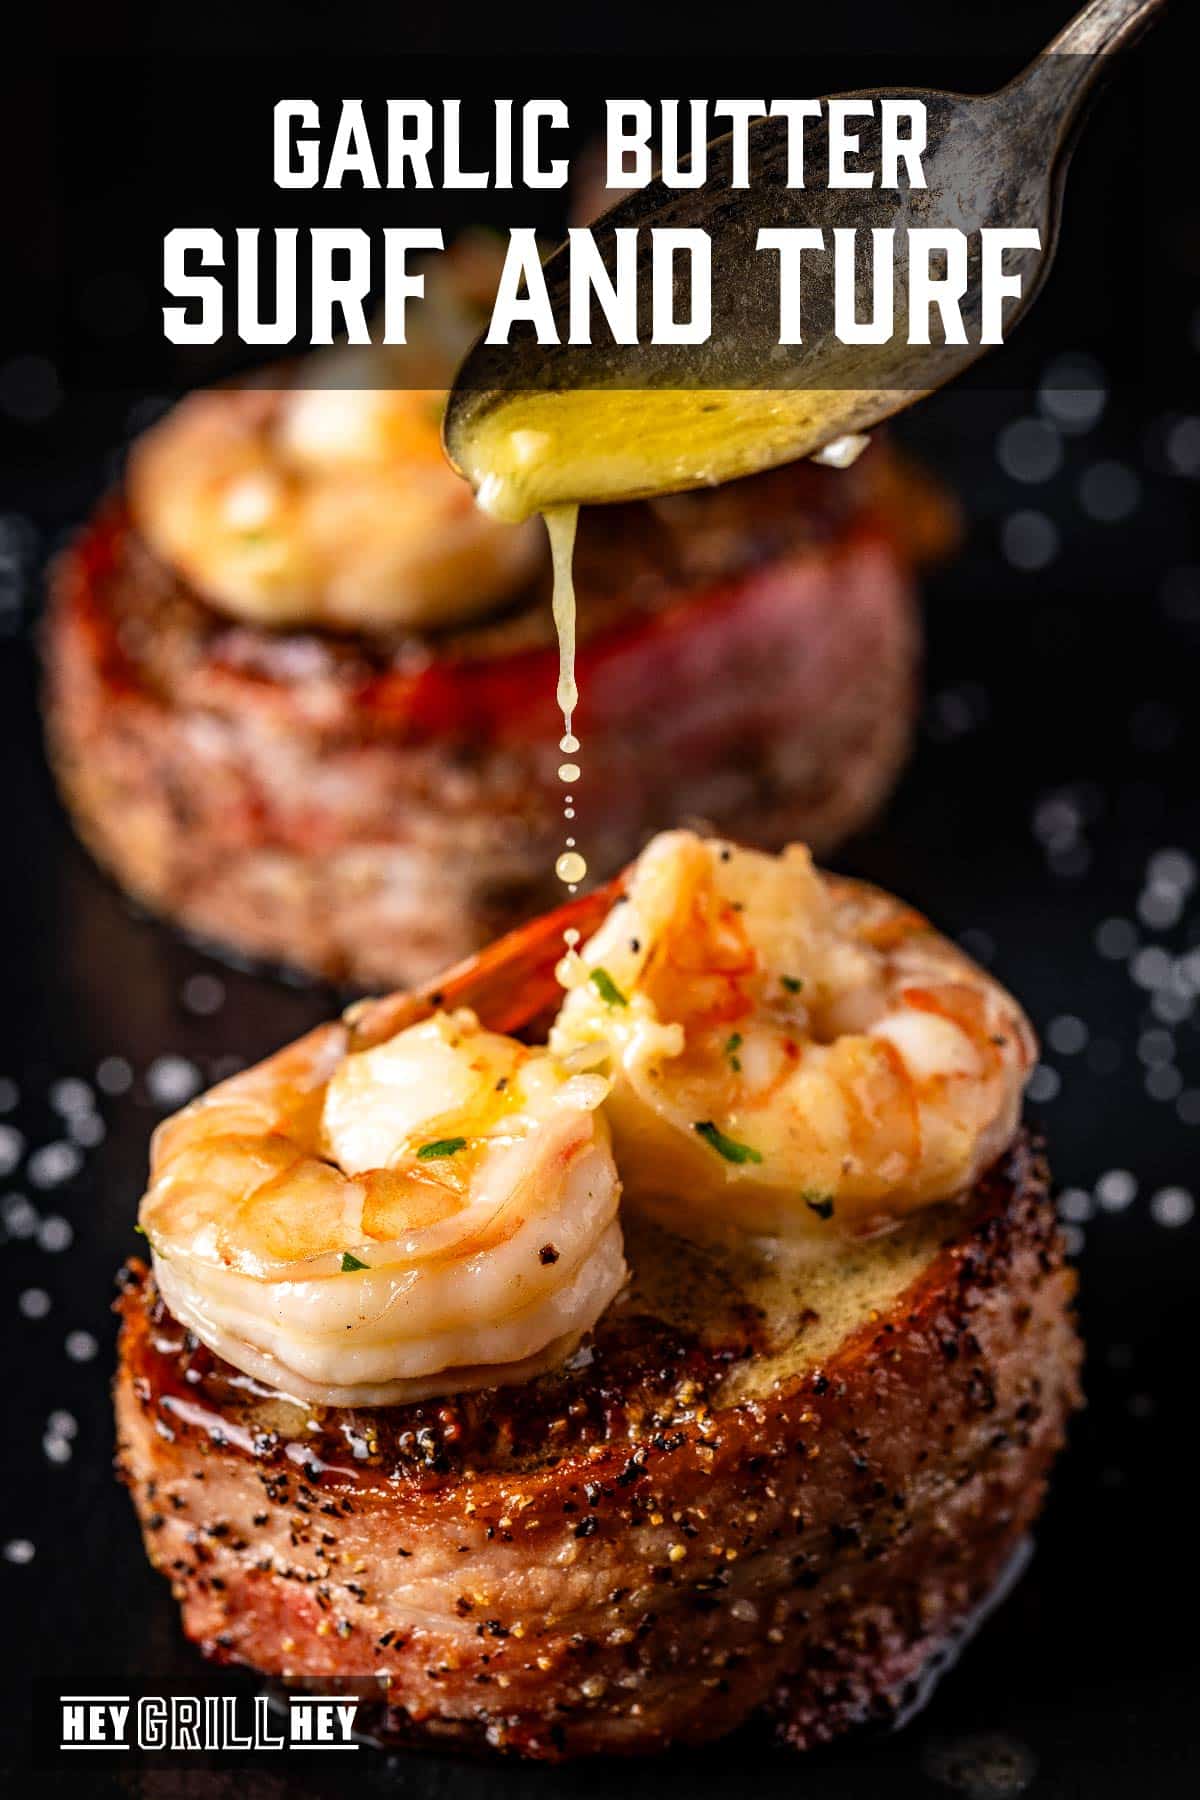 Bacon wrapped filets topped with shrimp and drizzled with garlic butter. Text reads "Garlic Butter Surf and Turf".